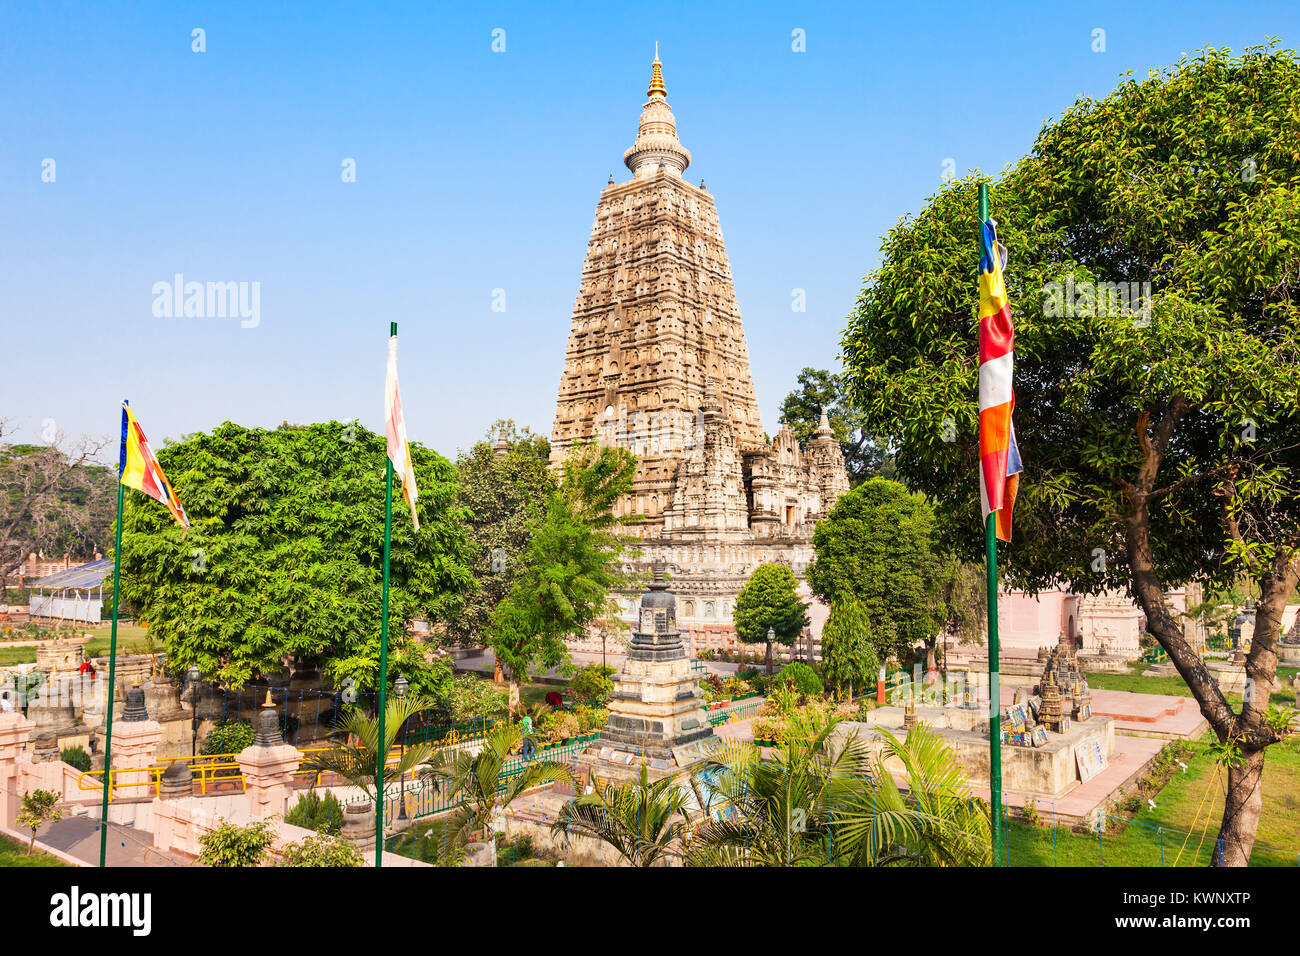 Mahabodhi Temple Complex in Gaya district in the state of Bihar, India Stock Photo